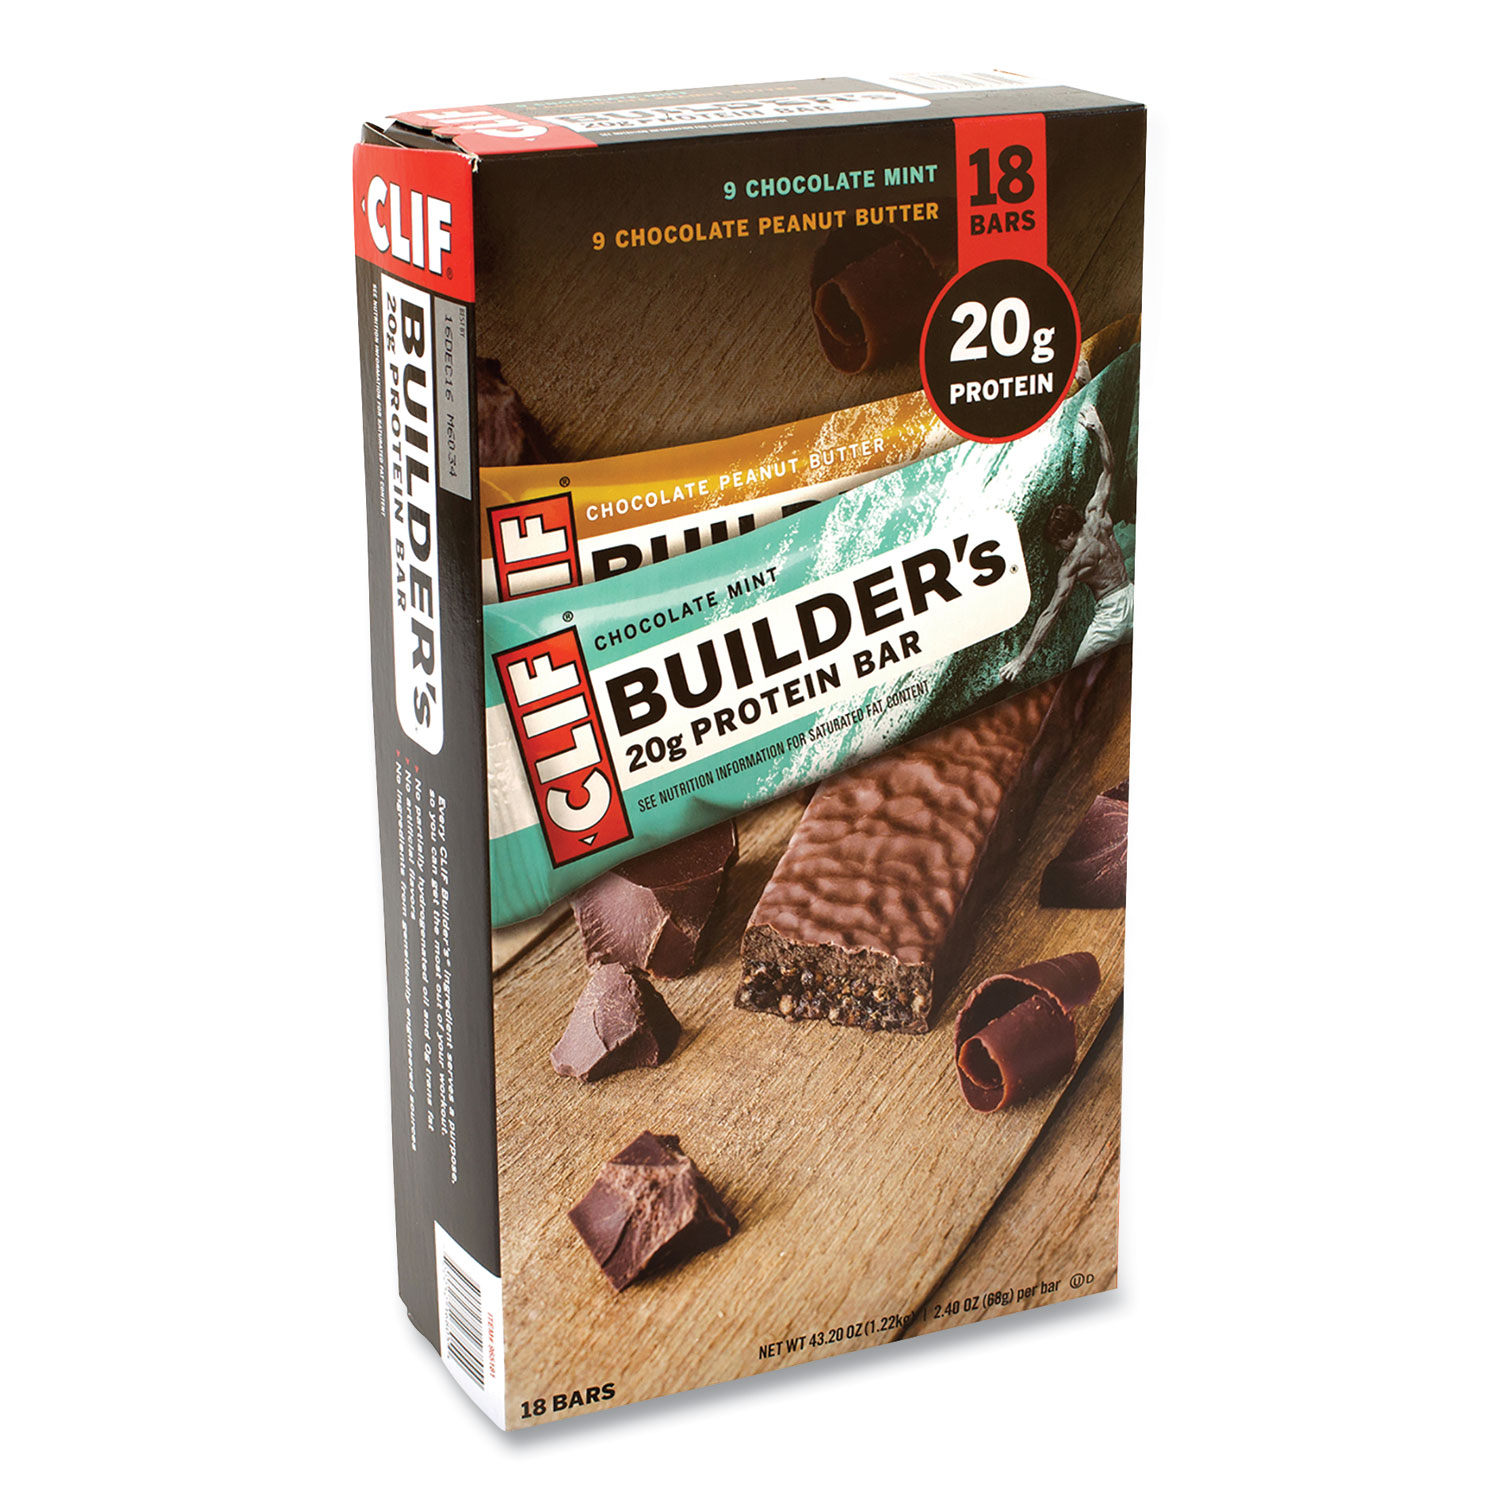  CLIF Bar 16805 Builders Protein Bar, Chocolate Mint/Chocolate Peanut Butter, 2.4 oz Bar, 18 Bars/Box, Free Delivery in 1-4 Business Days (GRR22000543) 